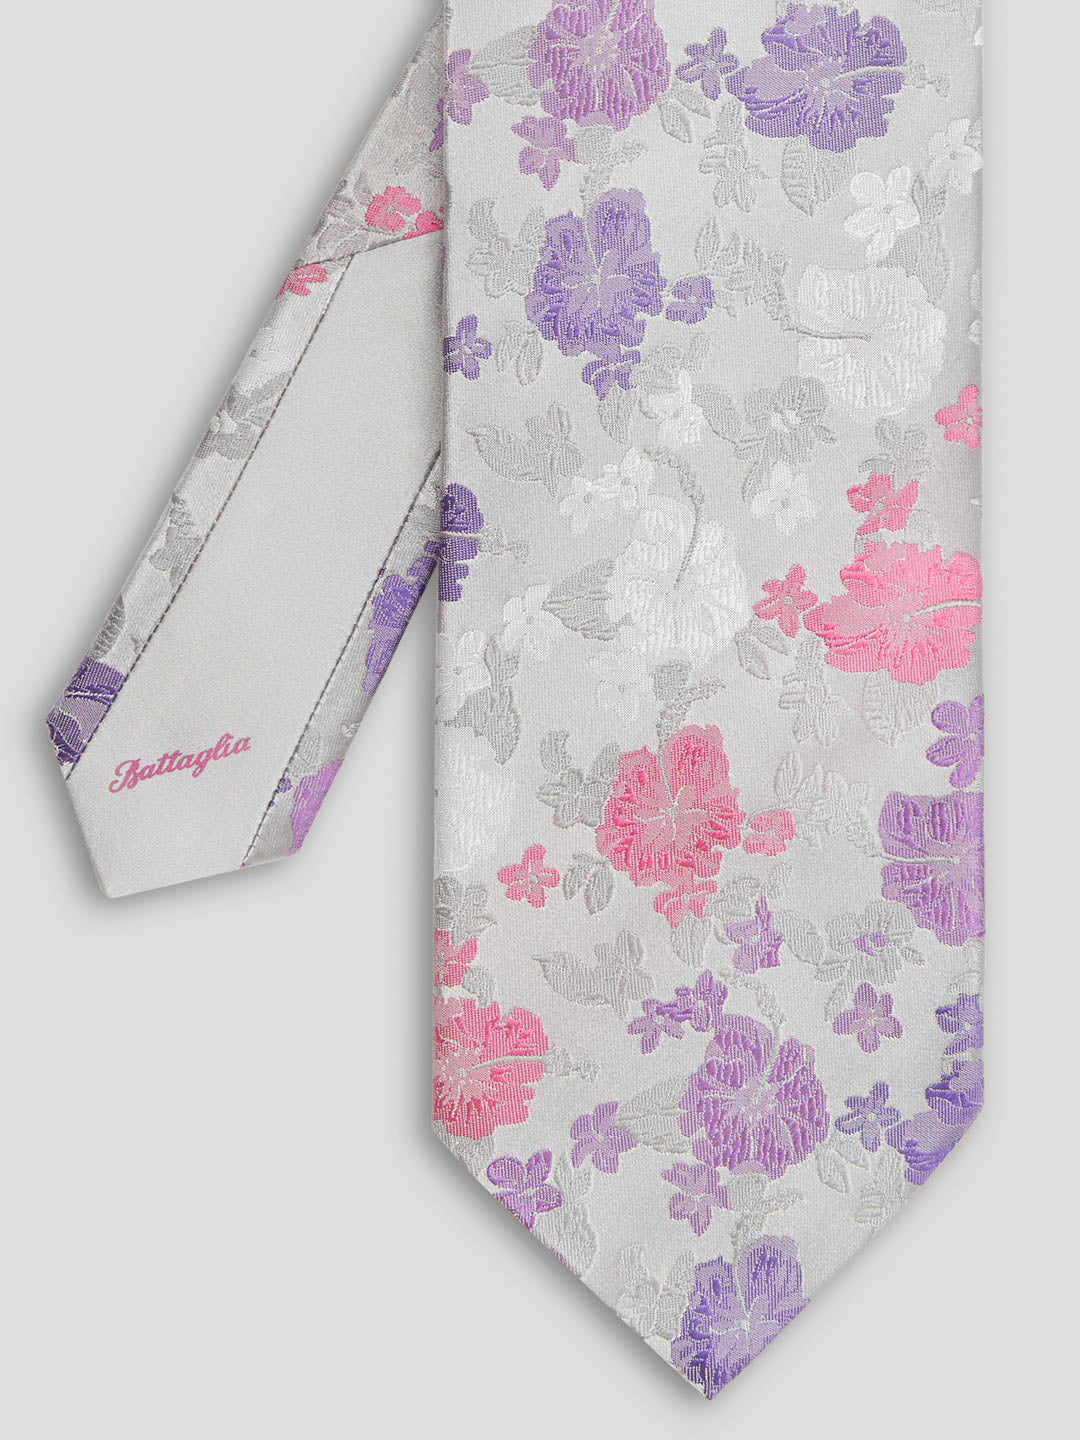 Silver tie with pink and purple flowers. 